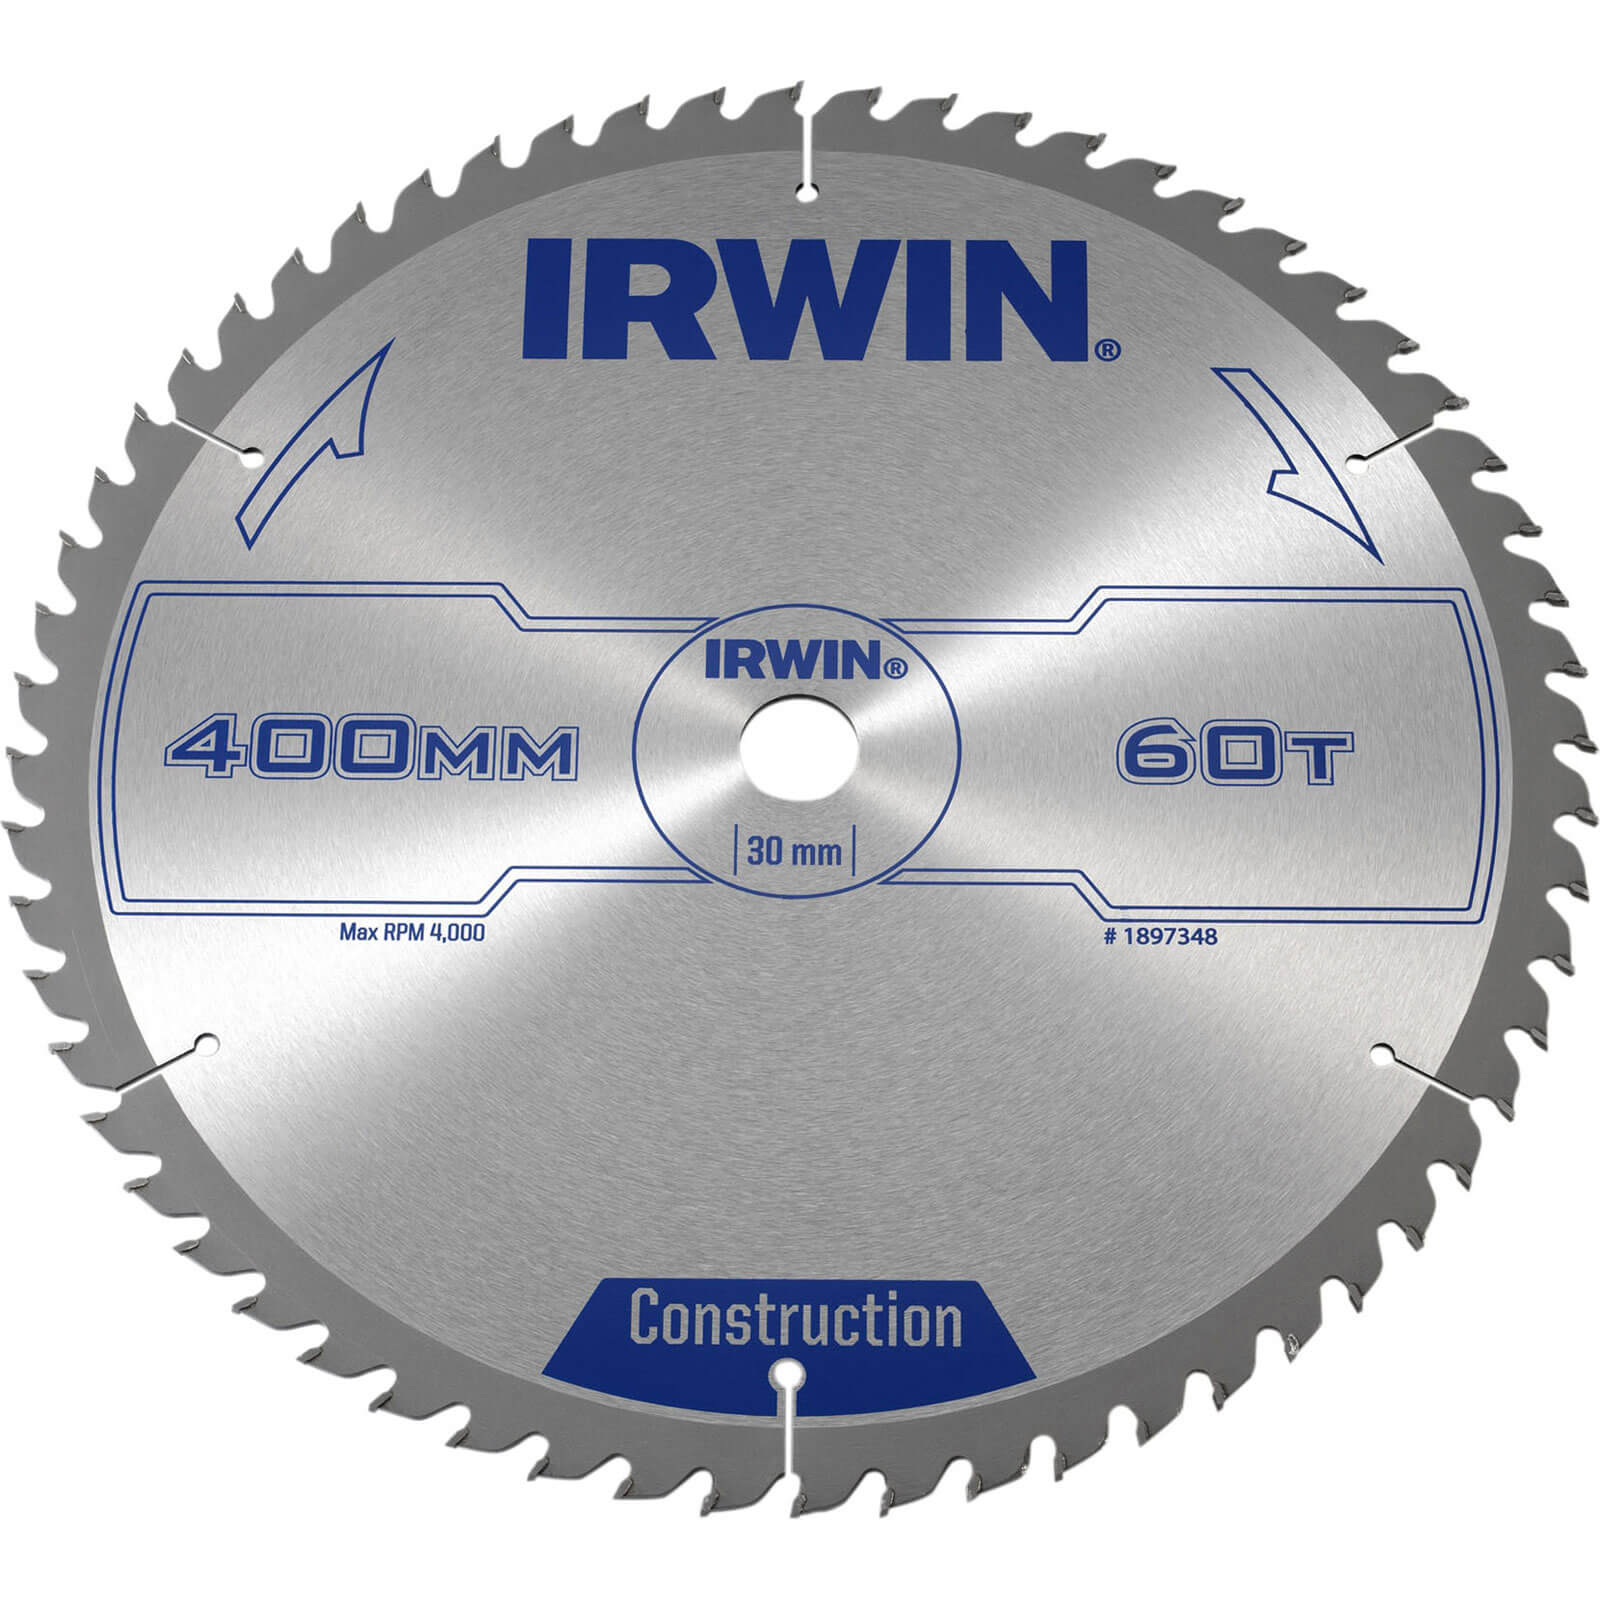 Image of Irwin ATB Construction Circular Saw Blade 400mm 60T 30mm